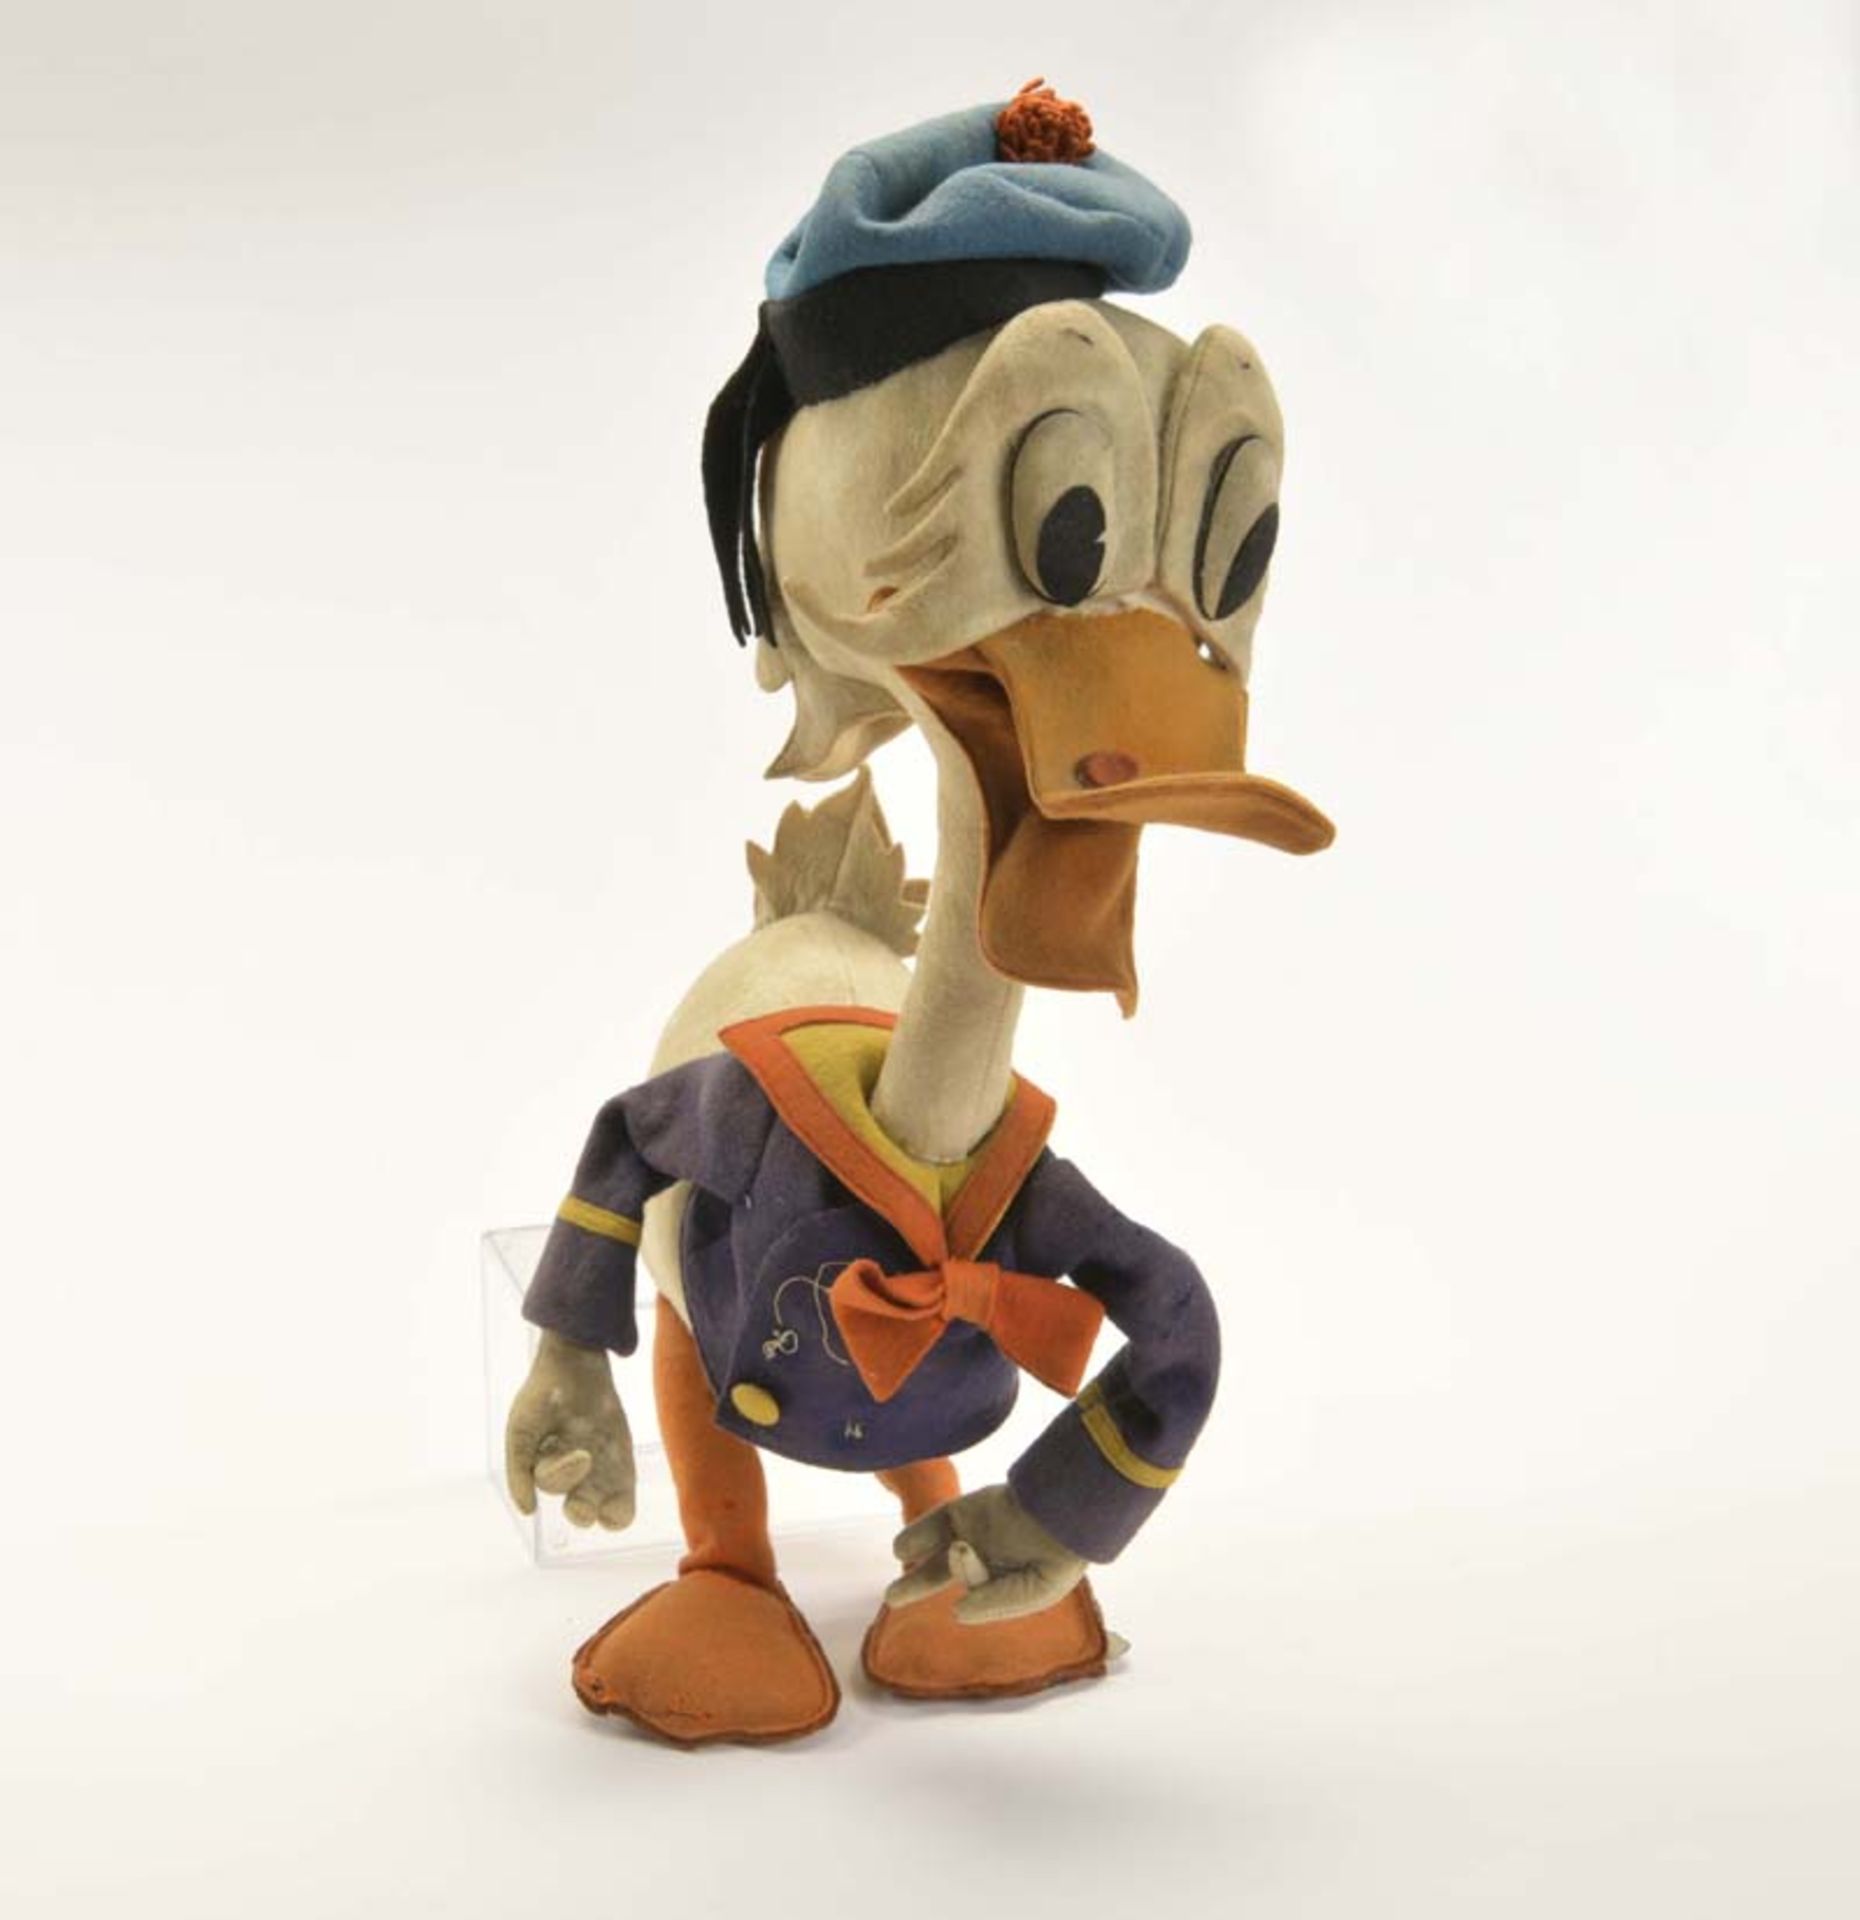 Donald Duck ancient, felt with min. defects, 1 foot seam open, C 2